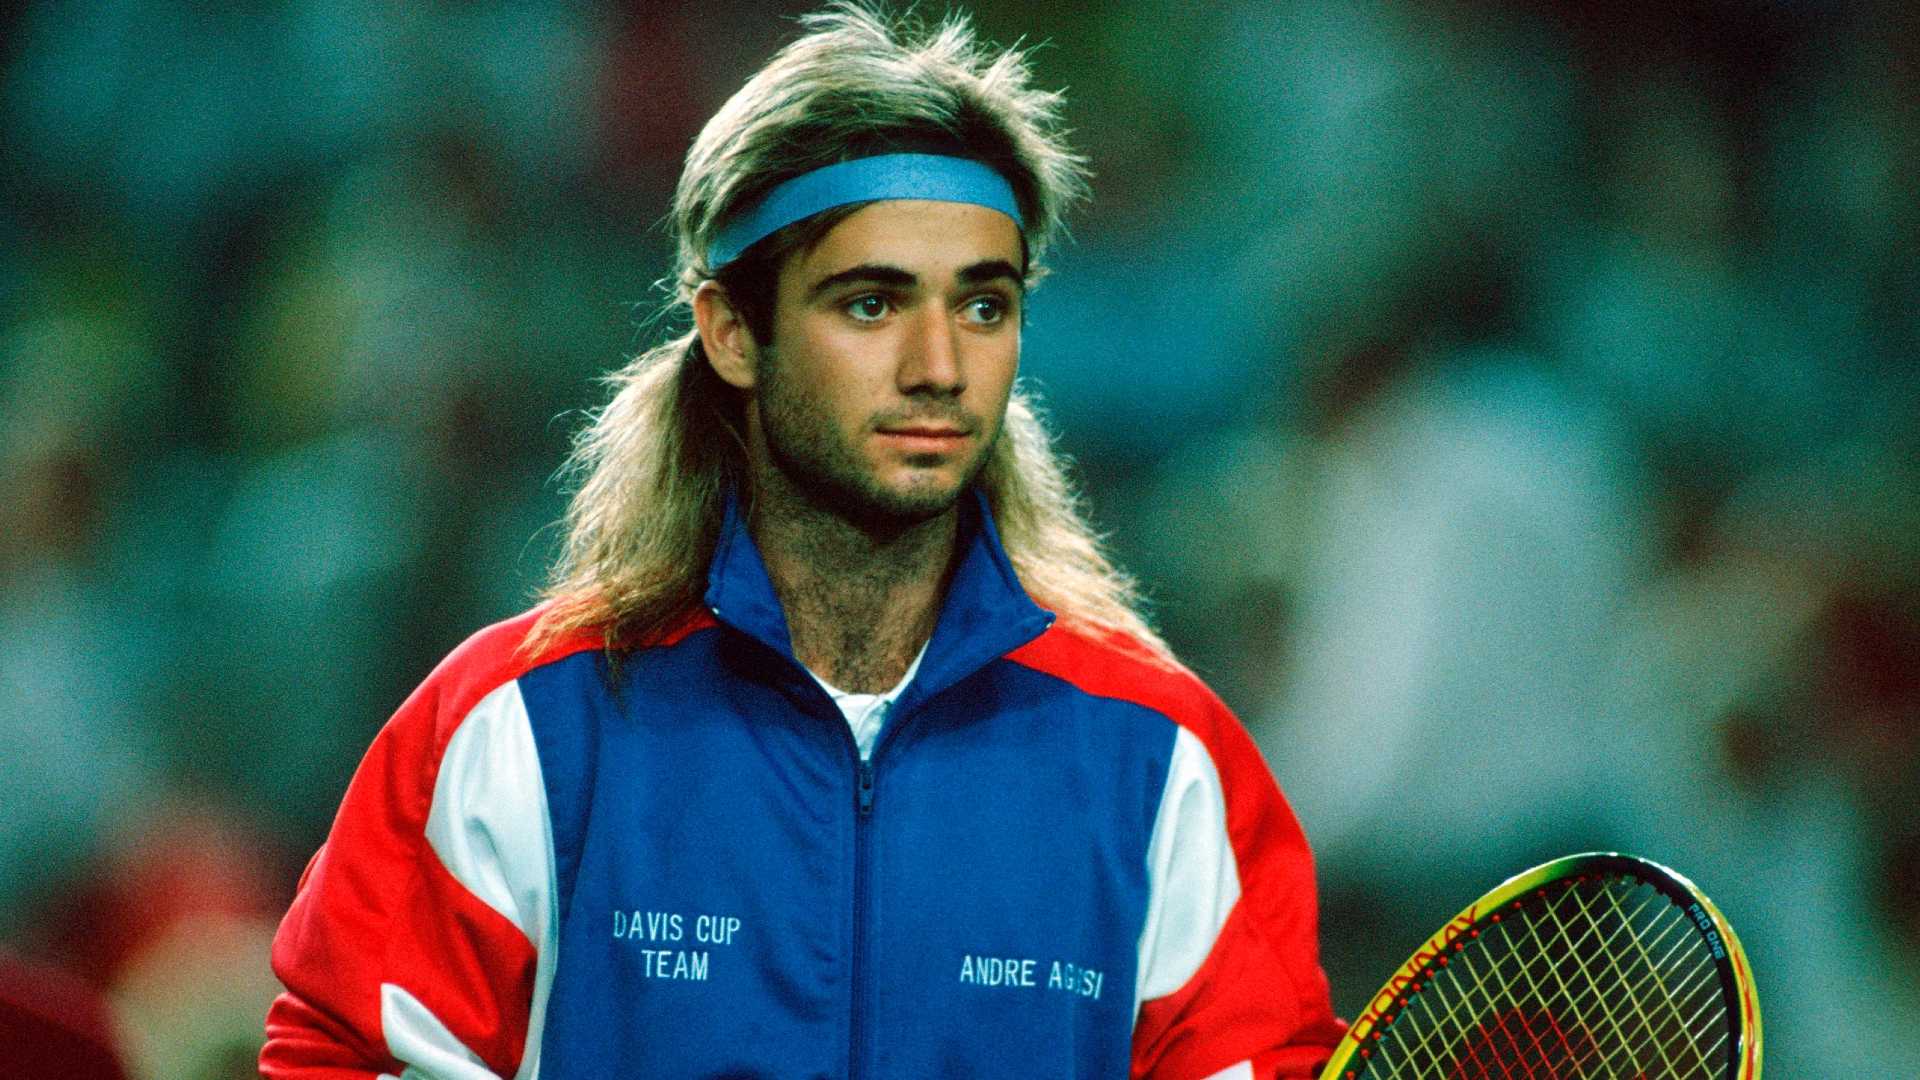 Andre Agassi Net Worth